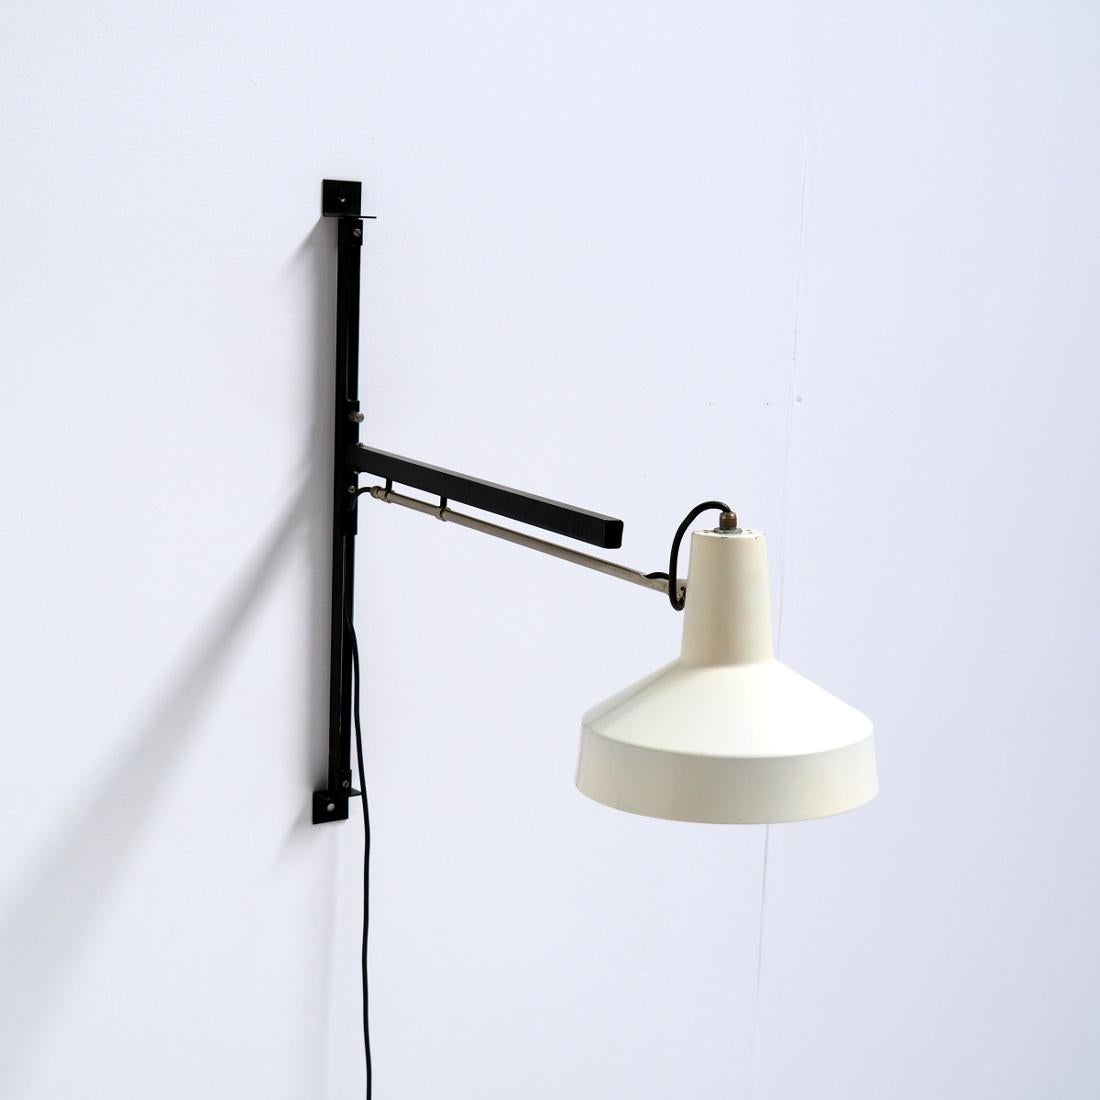 Mid-Century Modern Wall Lamp by Niek Hiemstra for Hiemstra Evolux